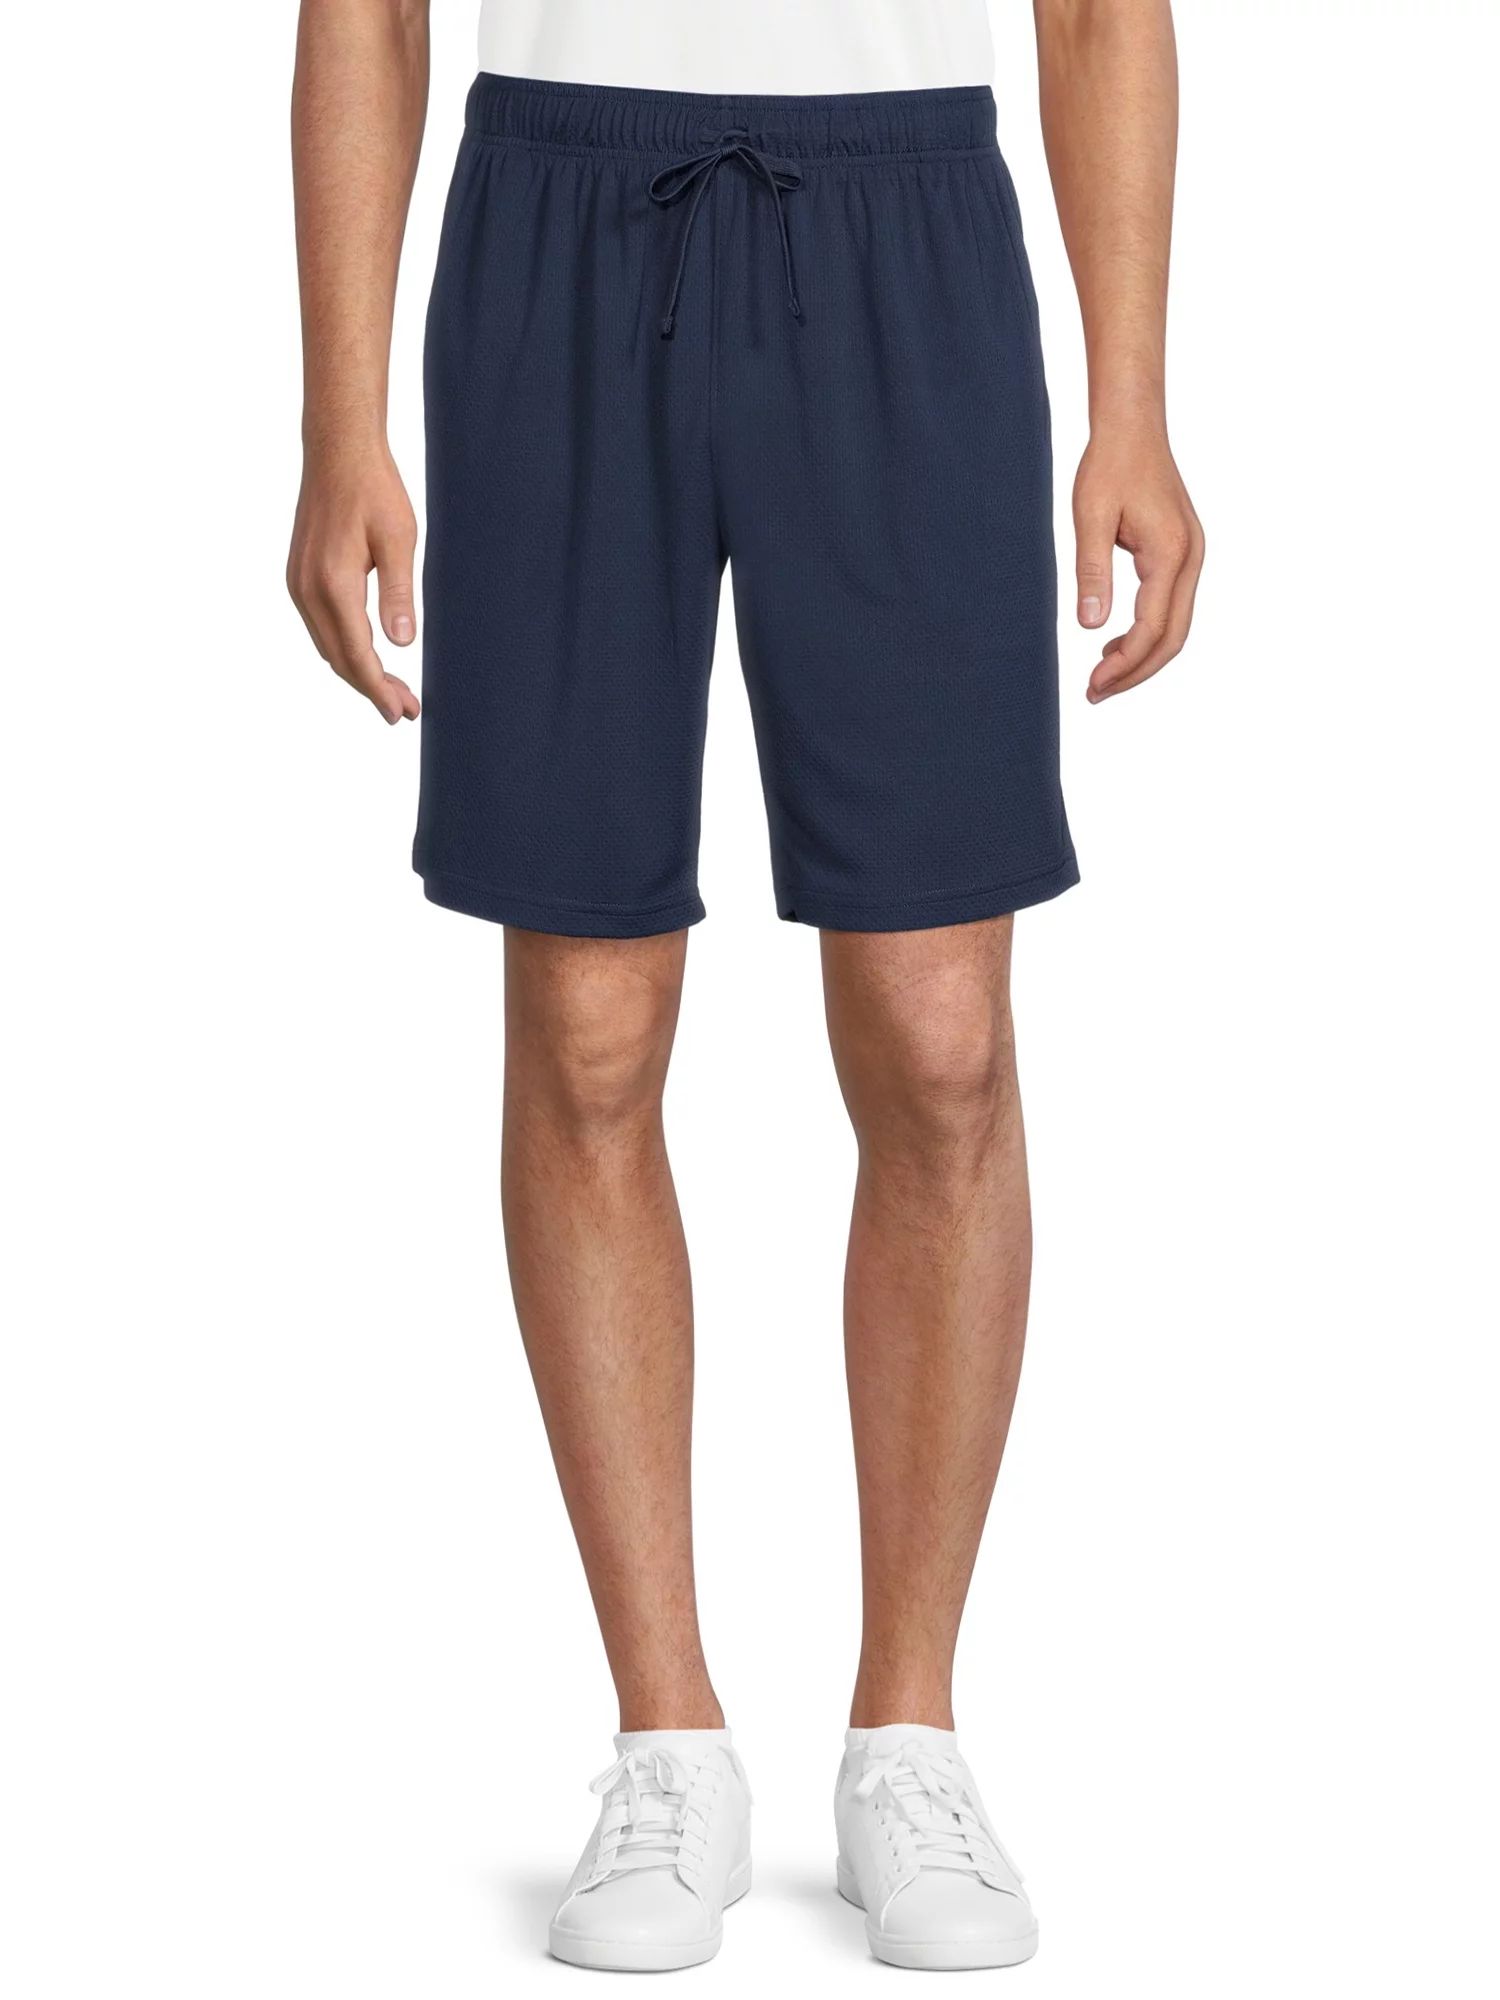 Athletic Works Men's and Big Men's 9" Active Mesh Shorts, up to Size 5XL | Walmart (US)